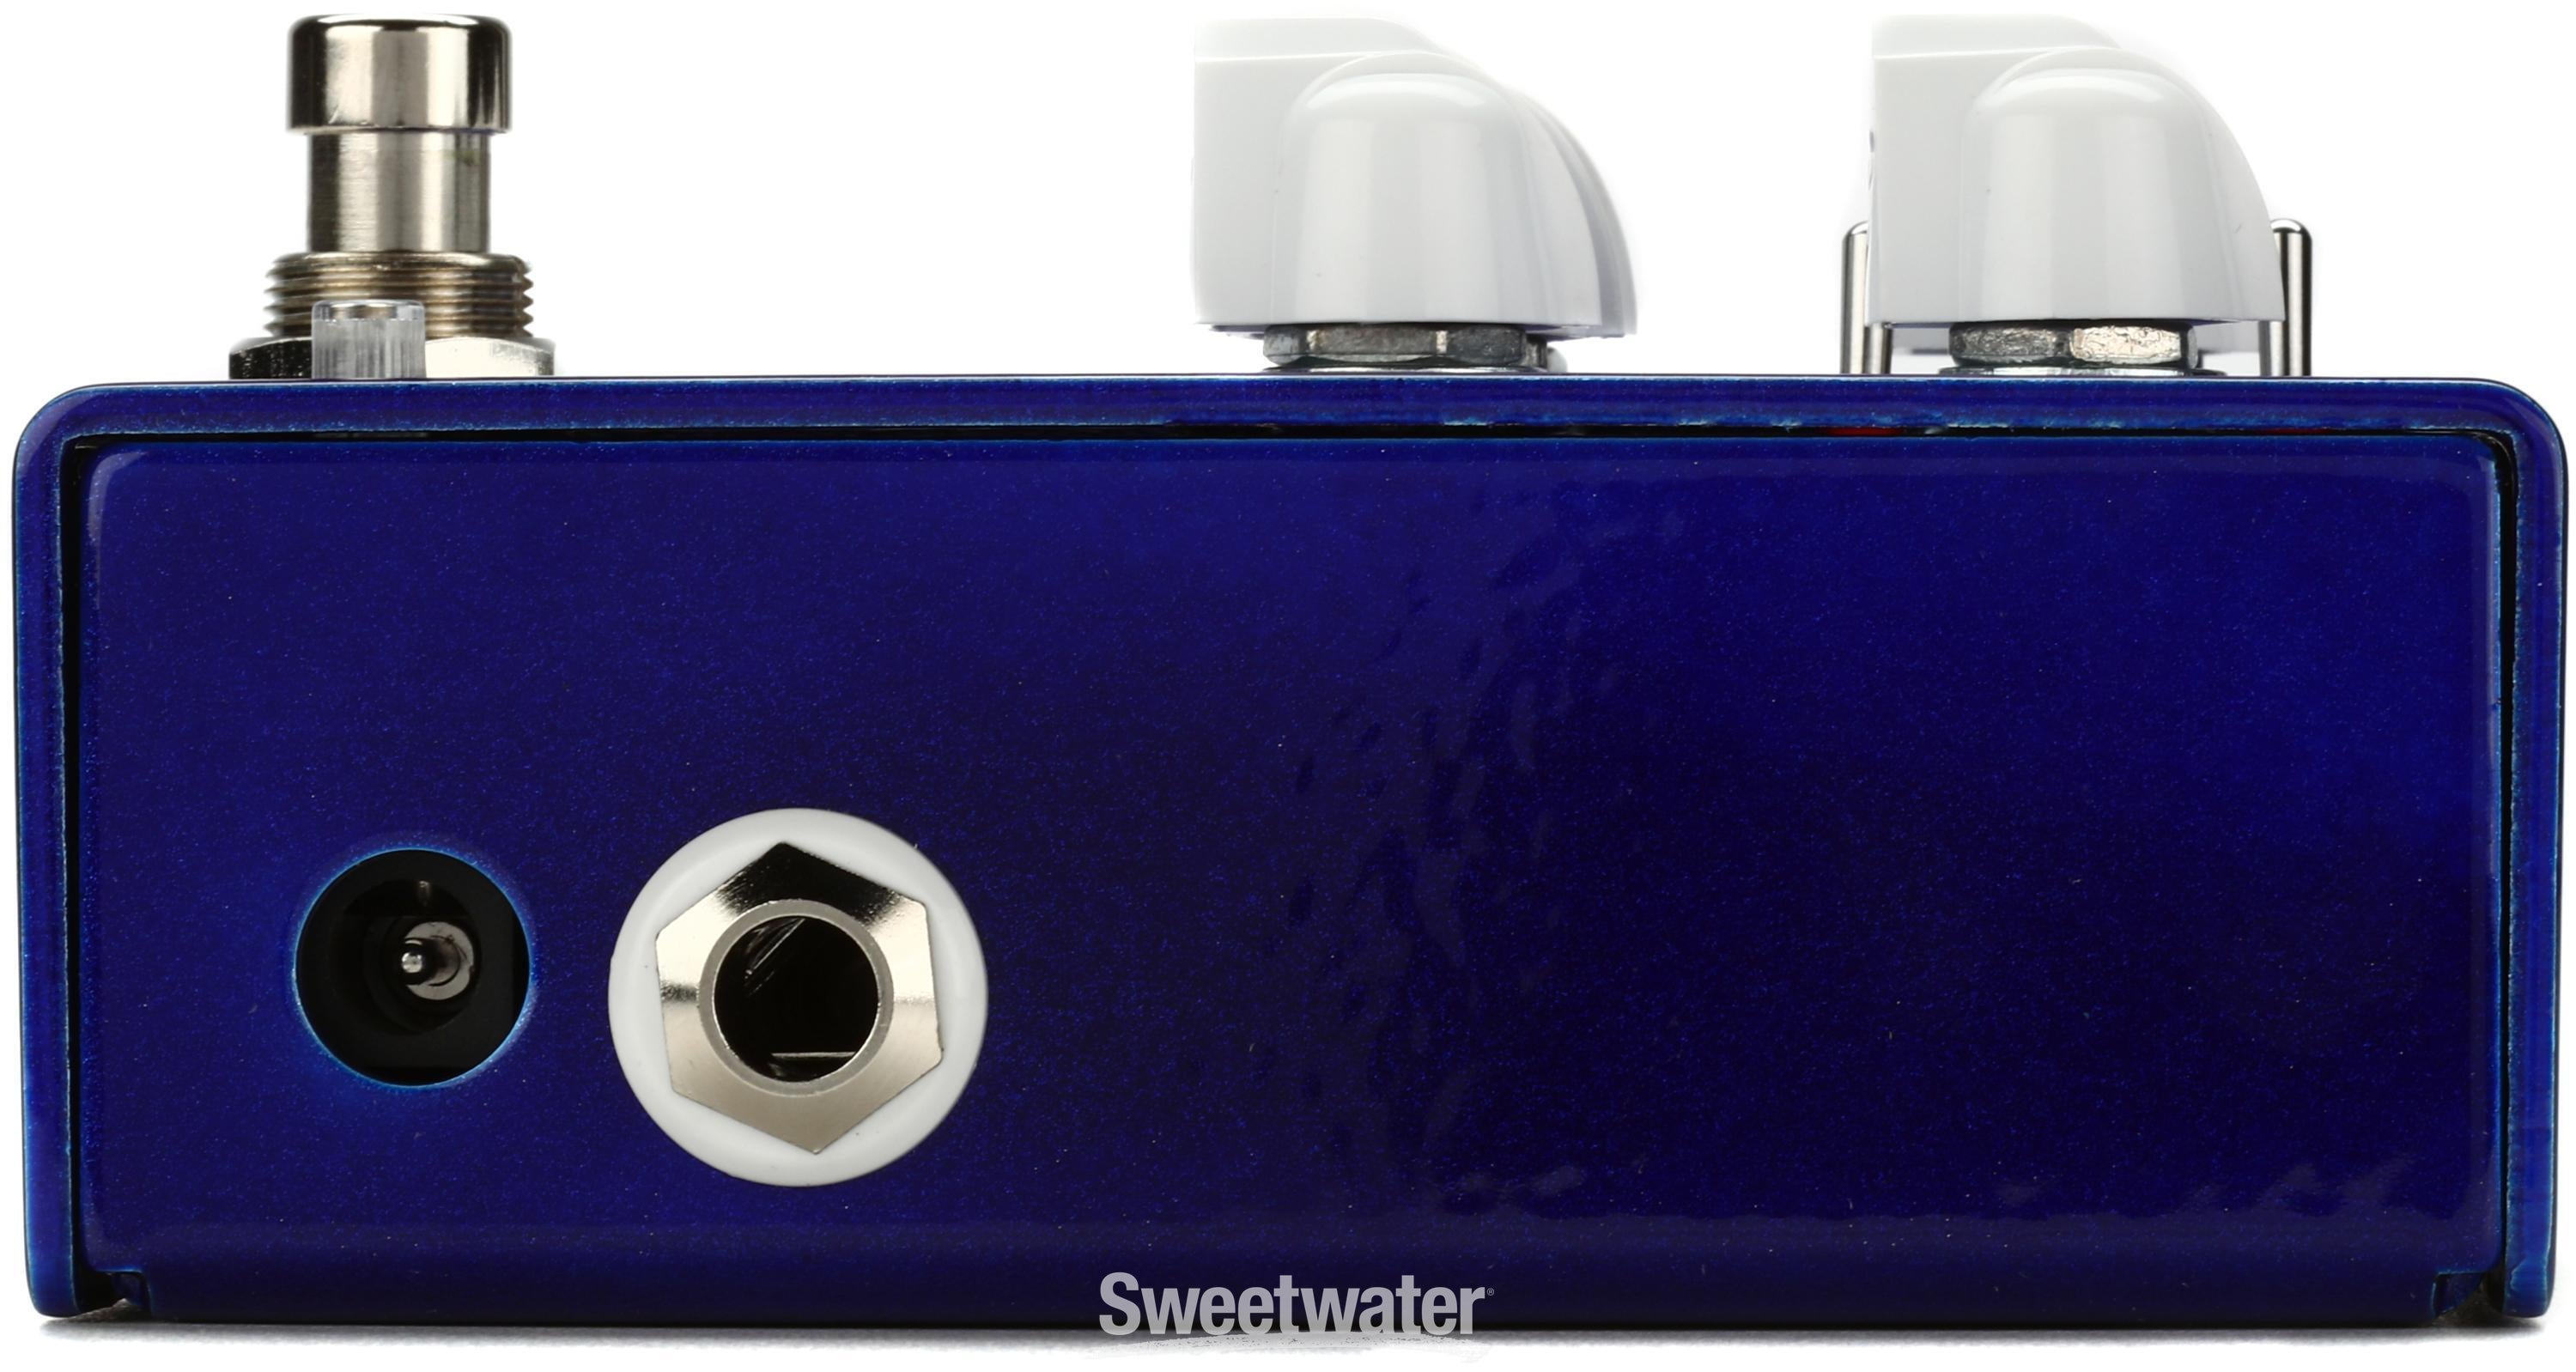 Bogner Ecstasy Blue Mini Overdrive Pedal | Sweetwater